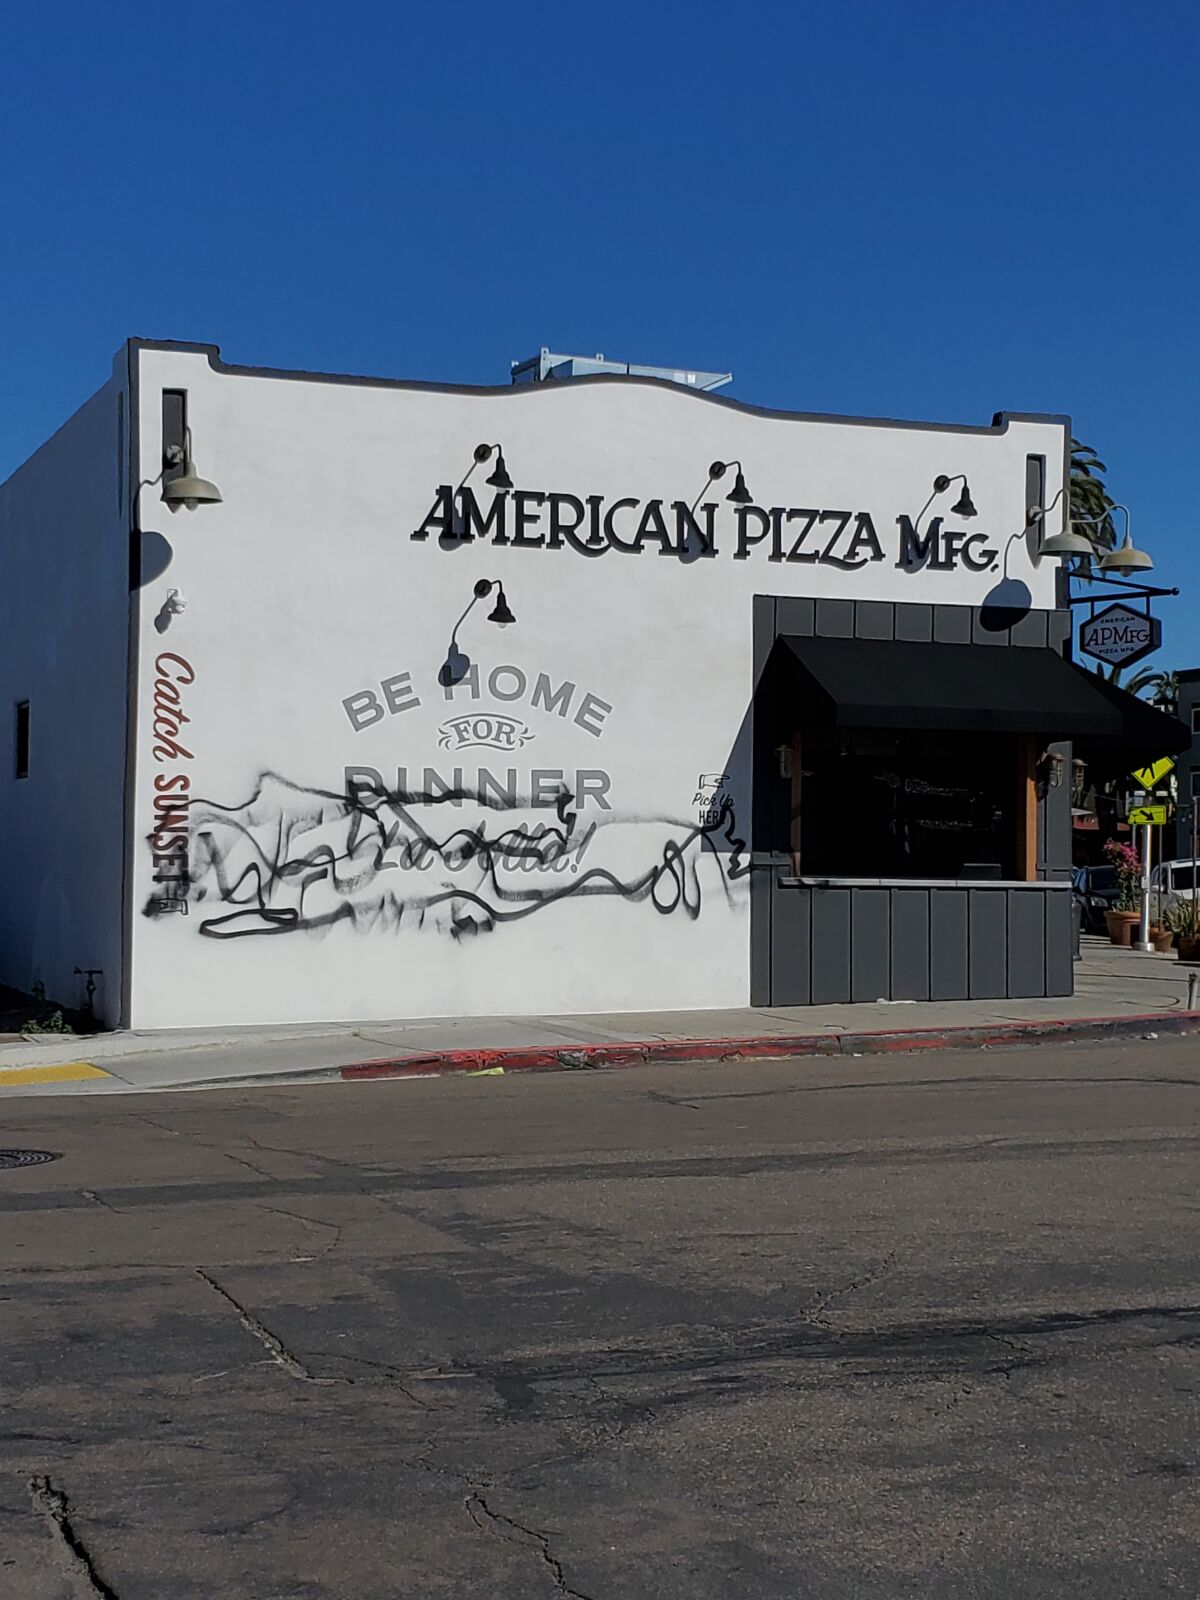 The American Pizza Manufacturing restaurant at 7402 La Jolla Blvd. has been vandalized twice in recent weeks.